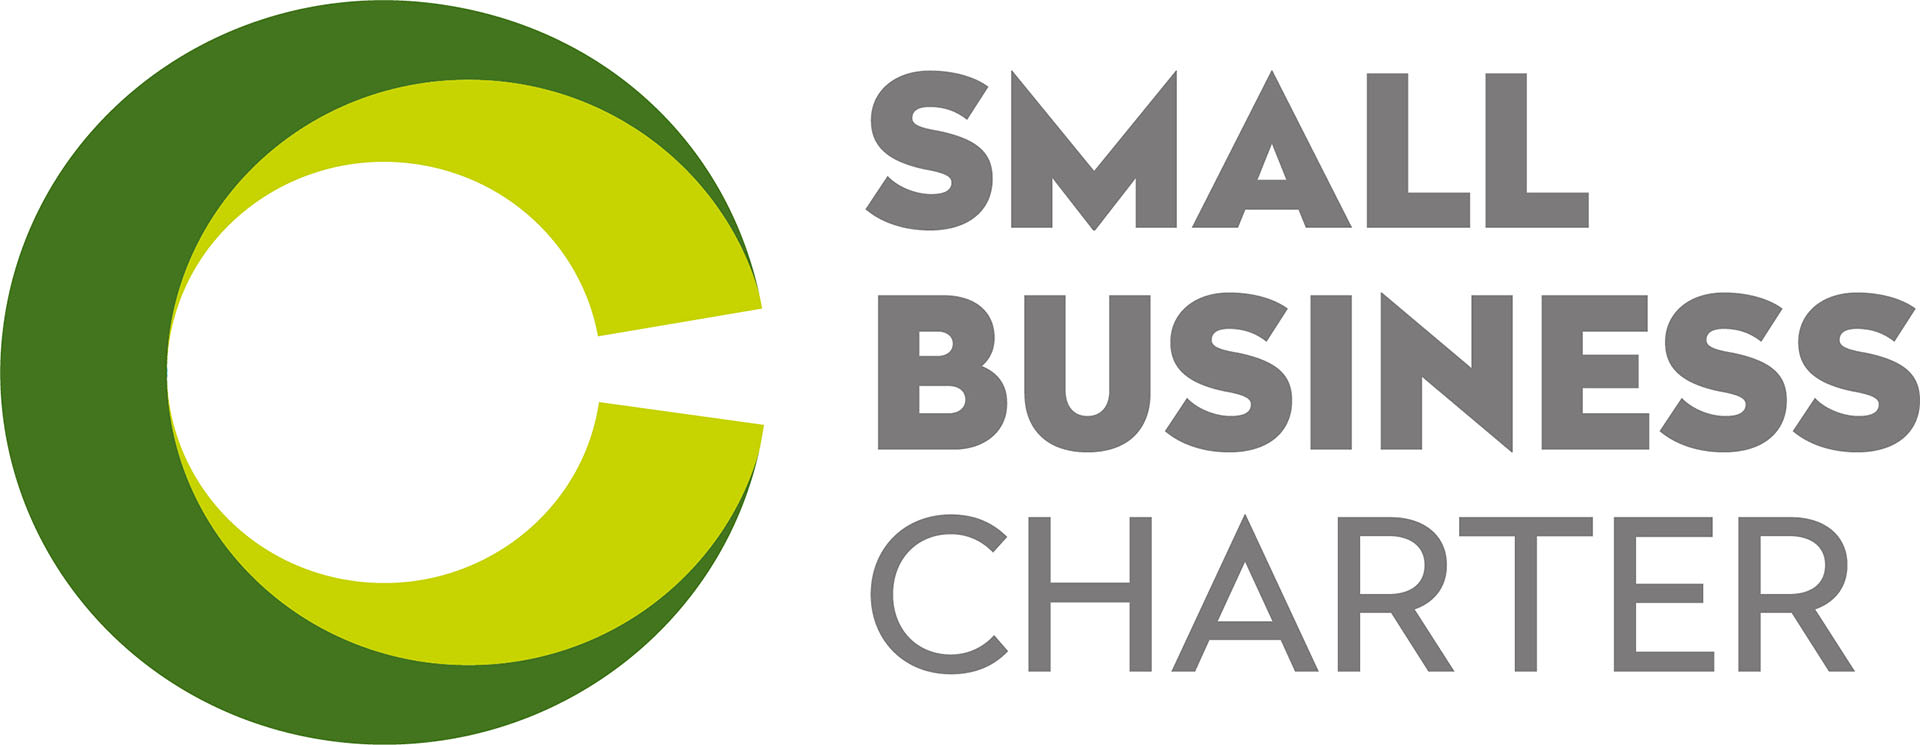 Logo of the small business charter